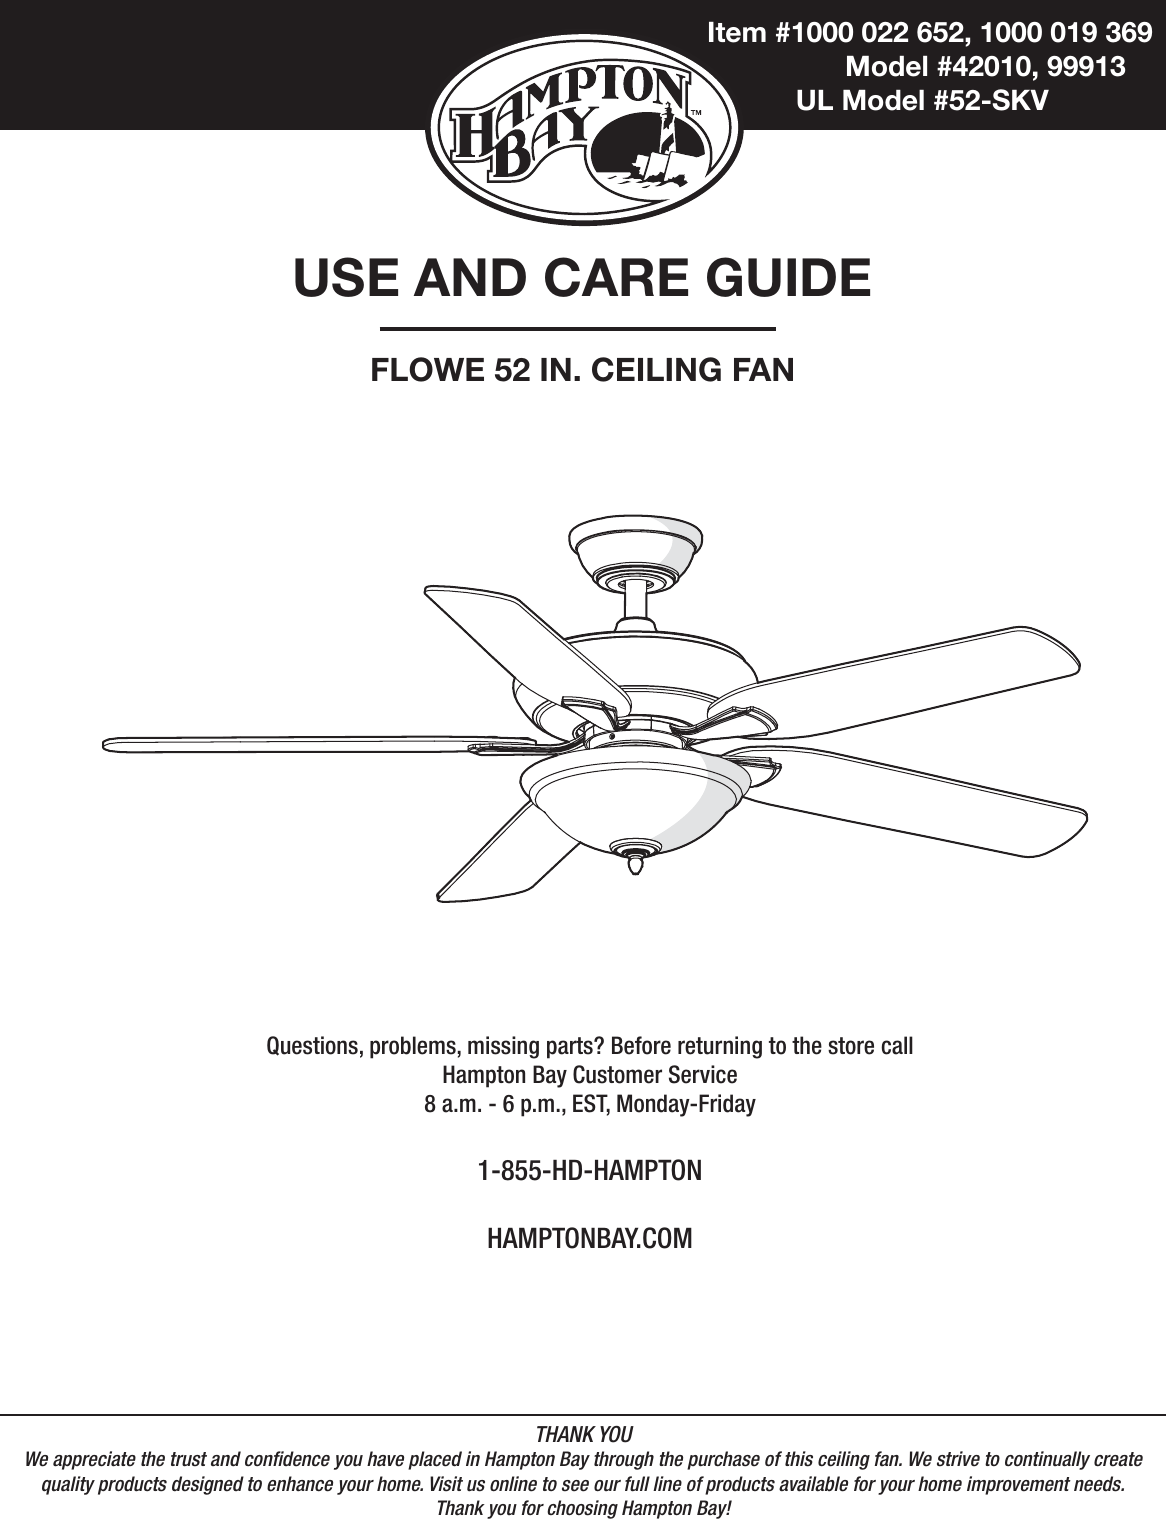  Item #1000 022 652, 1000 019 369    Model #42010, 99913   UL Model #52-SKVUSE AND CARE GUIDEFLOWE 52 IN. CEILING FANQuestions, problems, missing parts? Before returning to the store call Hampton Bay Customer Service8 a.m. - 6 p.m., EST, Monday-Friday1-855-HD-HAMPTONHAMPTONBAY.COMTHANK YOUWe appreciate the trust and condence you have placed in Hampton Bay through the purchase of this ceiling fan. We strive to continually createquality products designed to enhance your home. Visit us online to see our full line of products available for your home improvement needs. Thank you for choosing Hampton Bay!